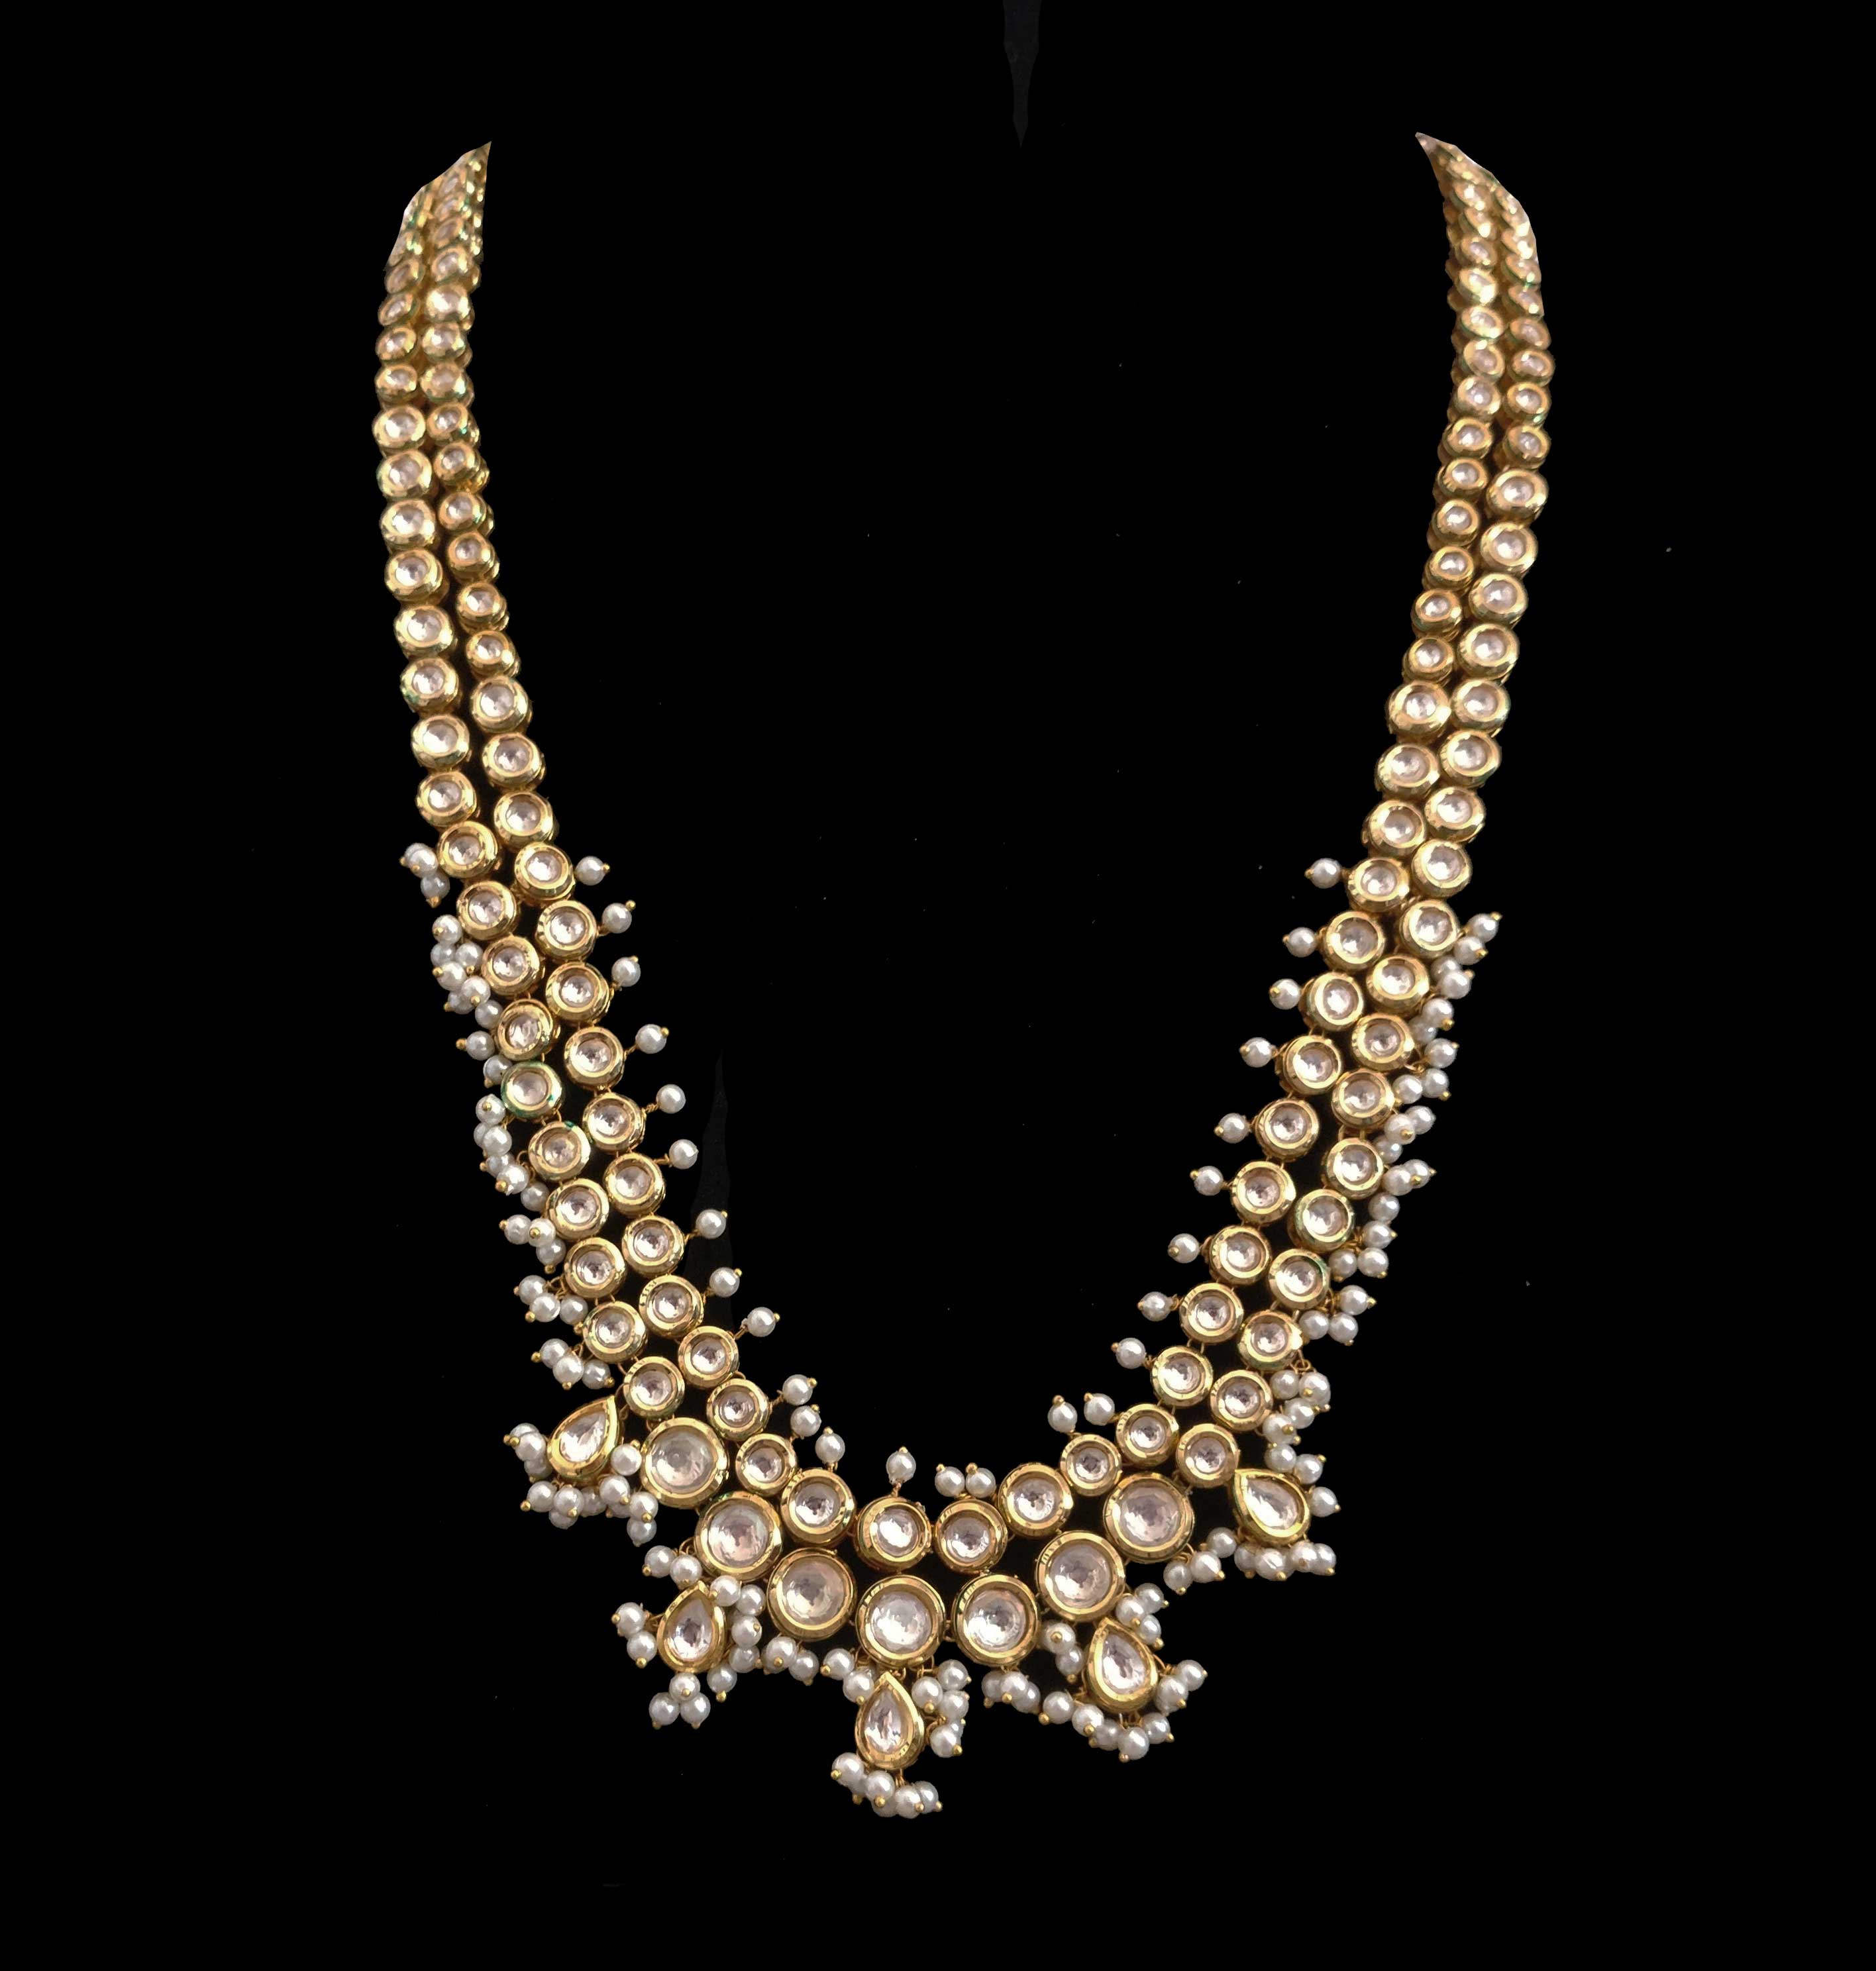 Kundan and Pearls Long Necklace - Jewelry Women Accessories | World Art ...